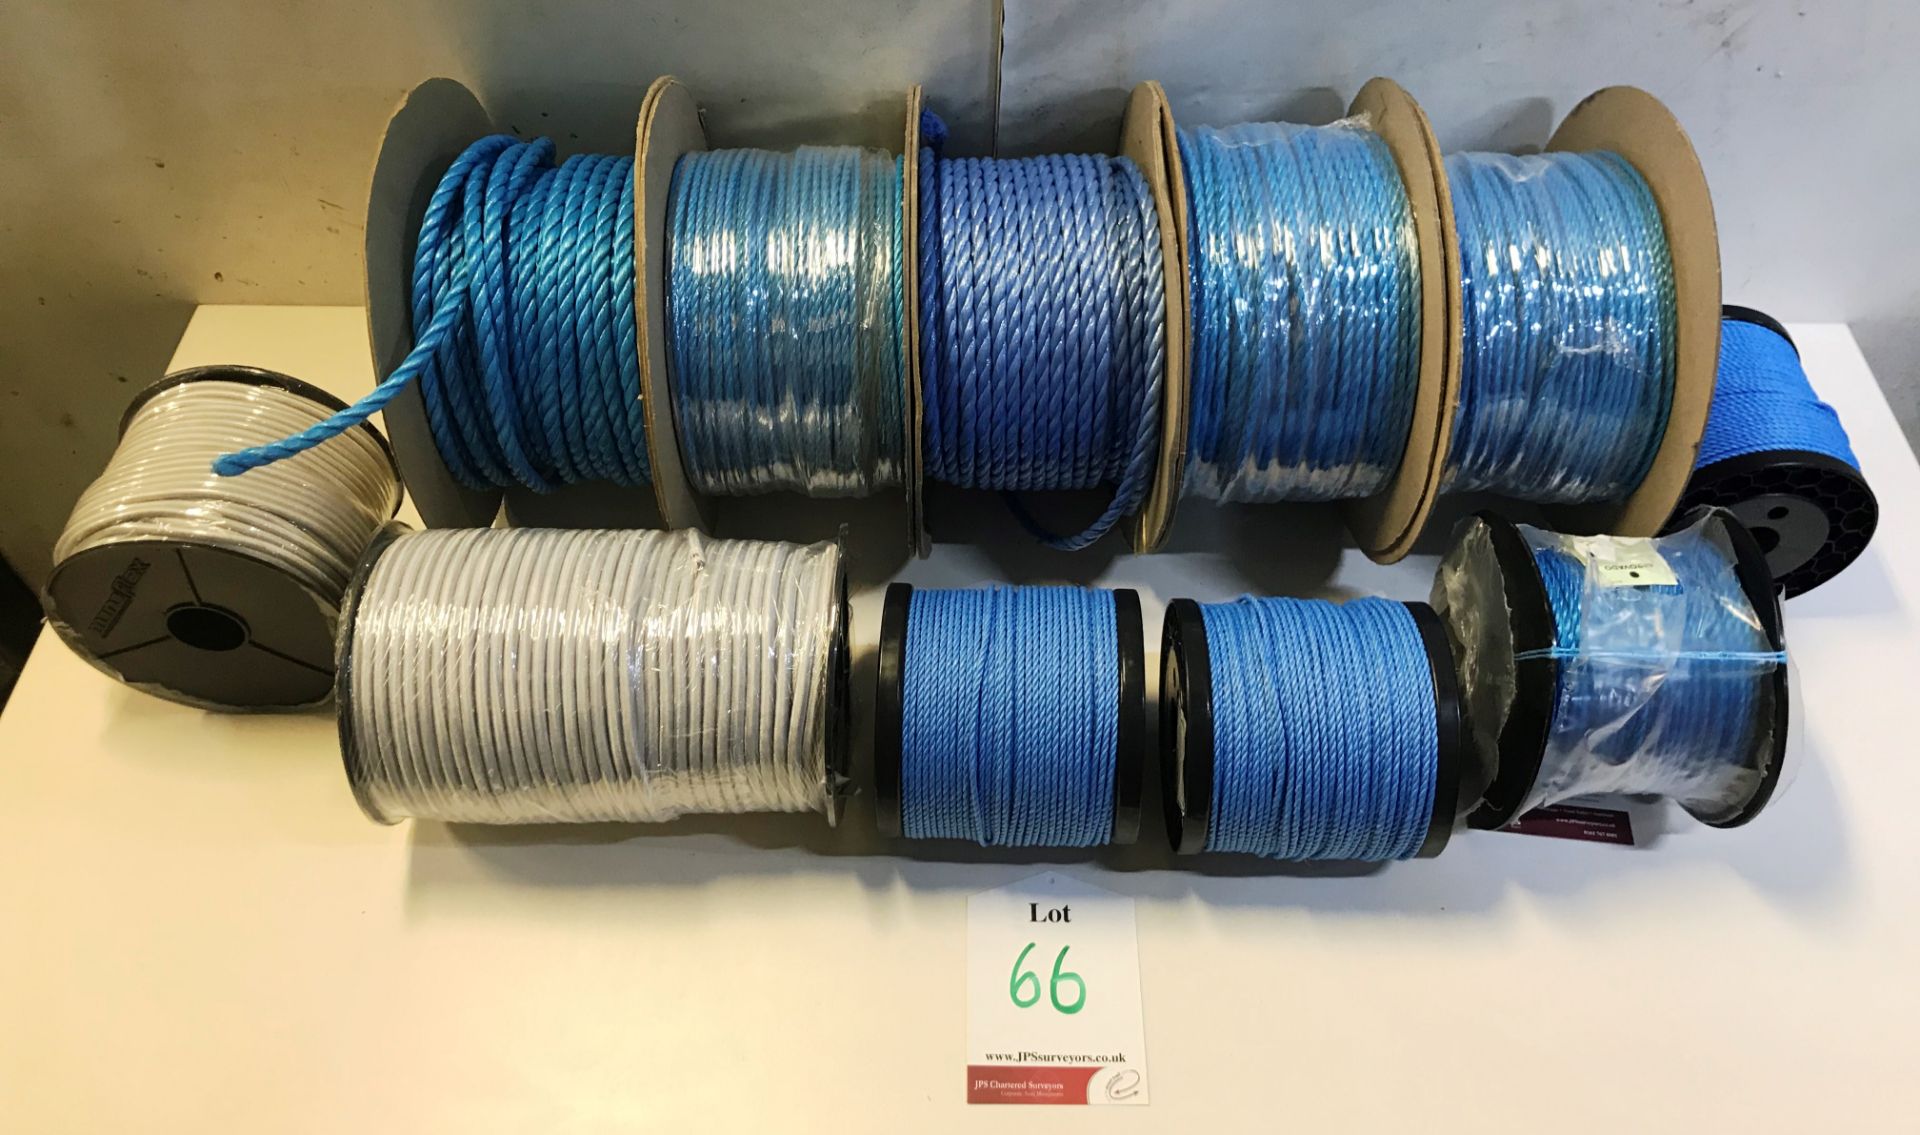 40 x Reels of Rope/String - Various Lengths & Thicknesses as per photos